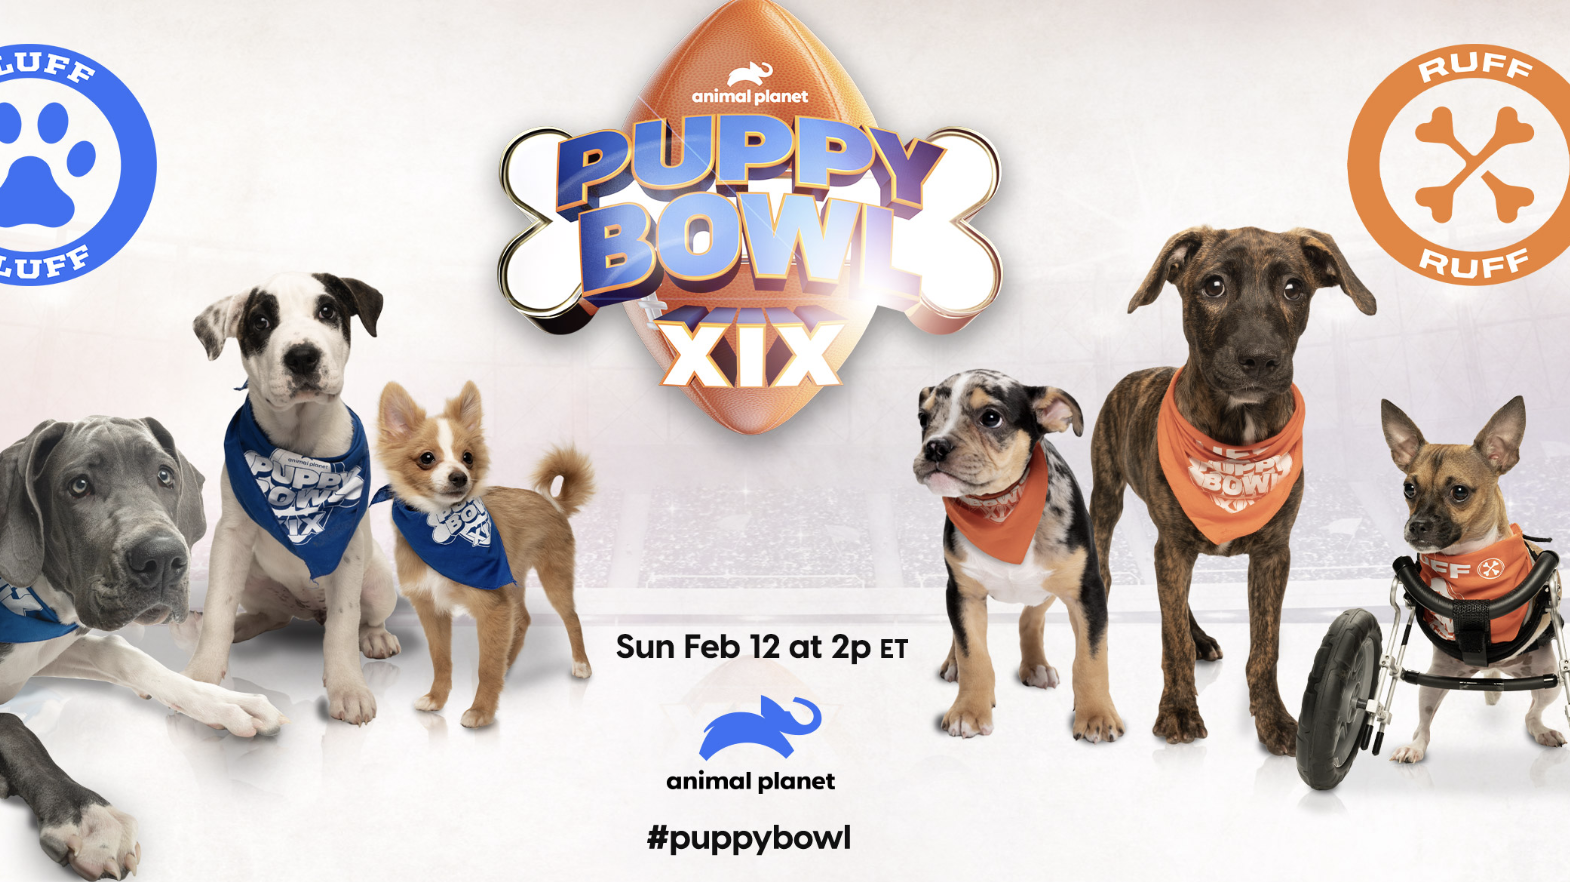 Discovery Puppy Bowl Kitty Halftime Show Sweepstakes Win 5,000 Cash